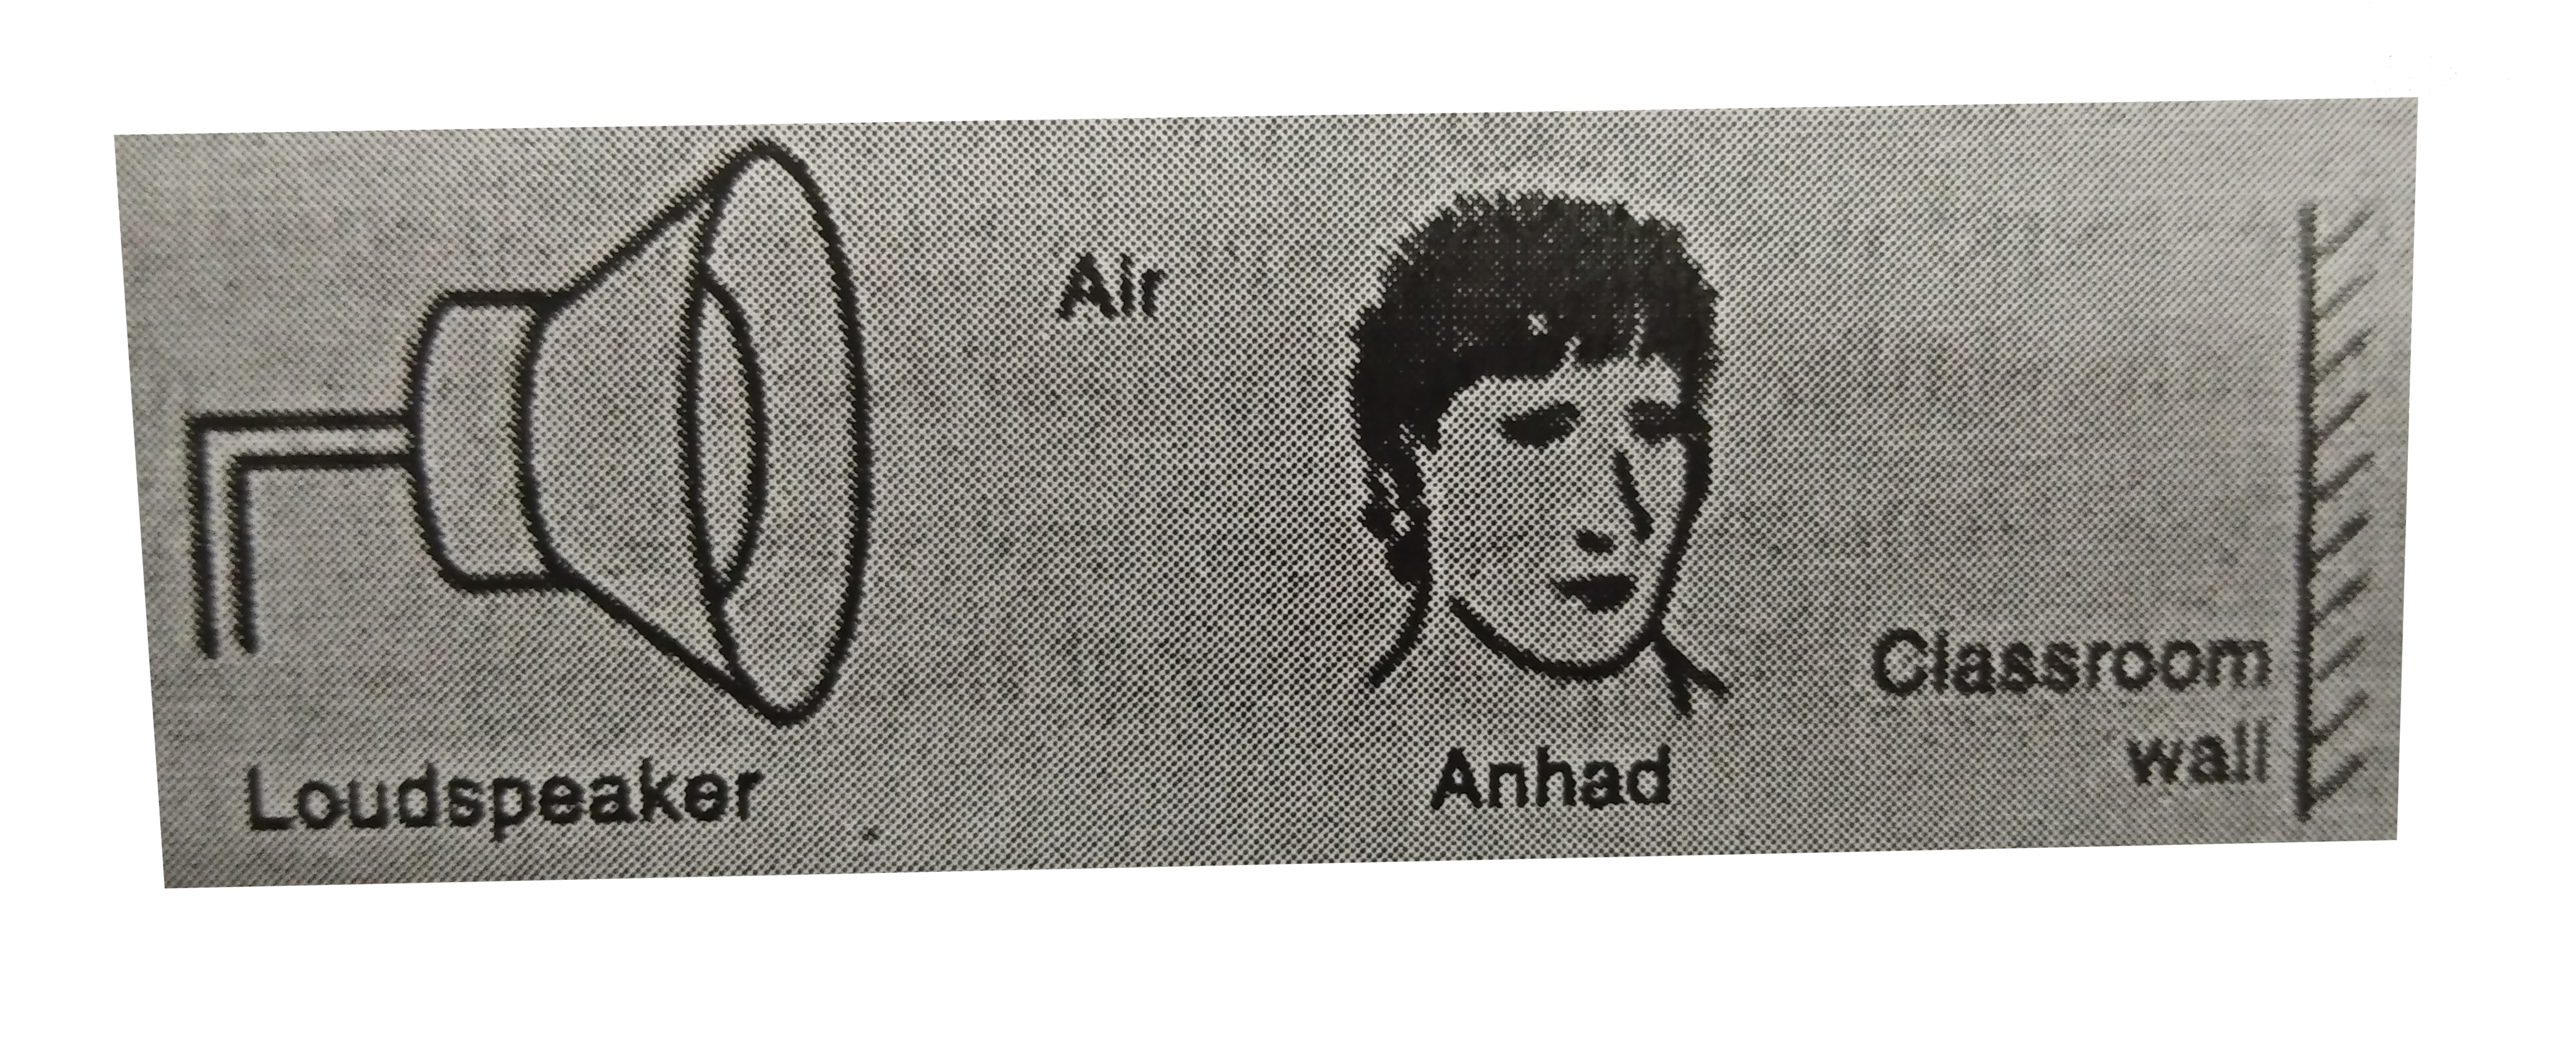 In an experiment, Anhad studies sound waves. He sets up a loundspeaker to produce sound as shown below:      Anhad adjuts the signal to the loudspeaker to given a sound of frequency 200 Hz.   (a) What happens to tha air in-between Anhad and the loudspeaker?   (b) Explain how Anhad receives sound in both ears.